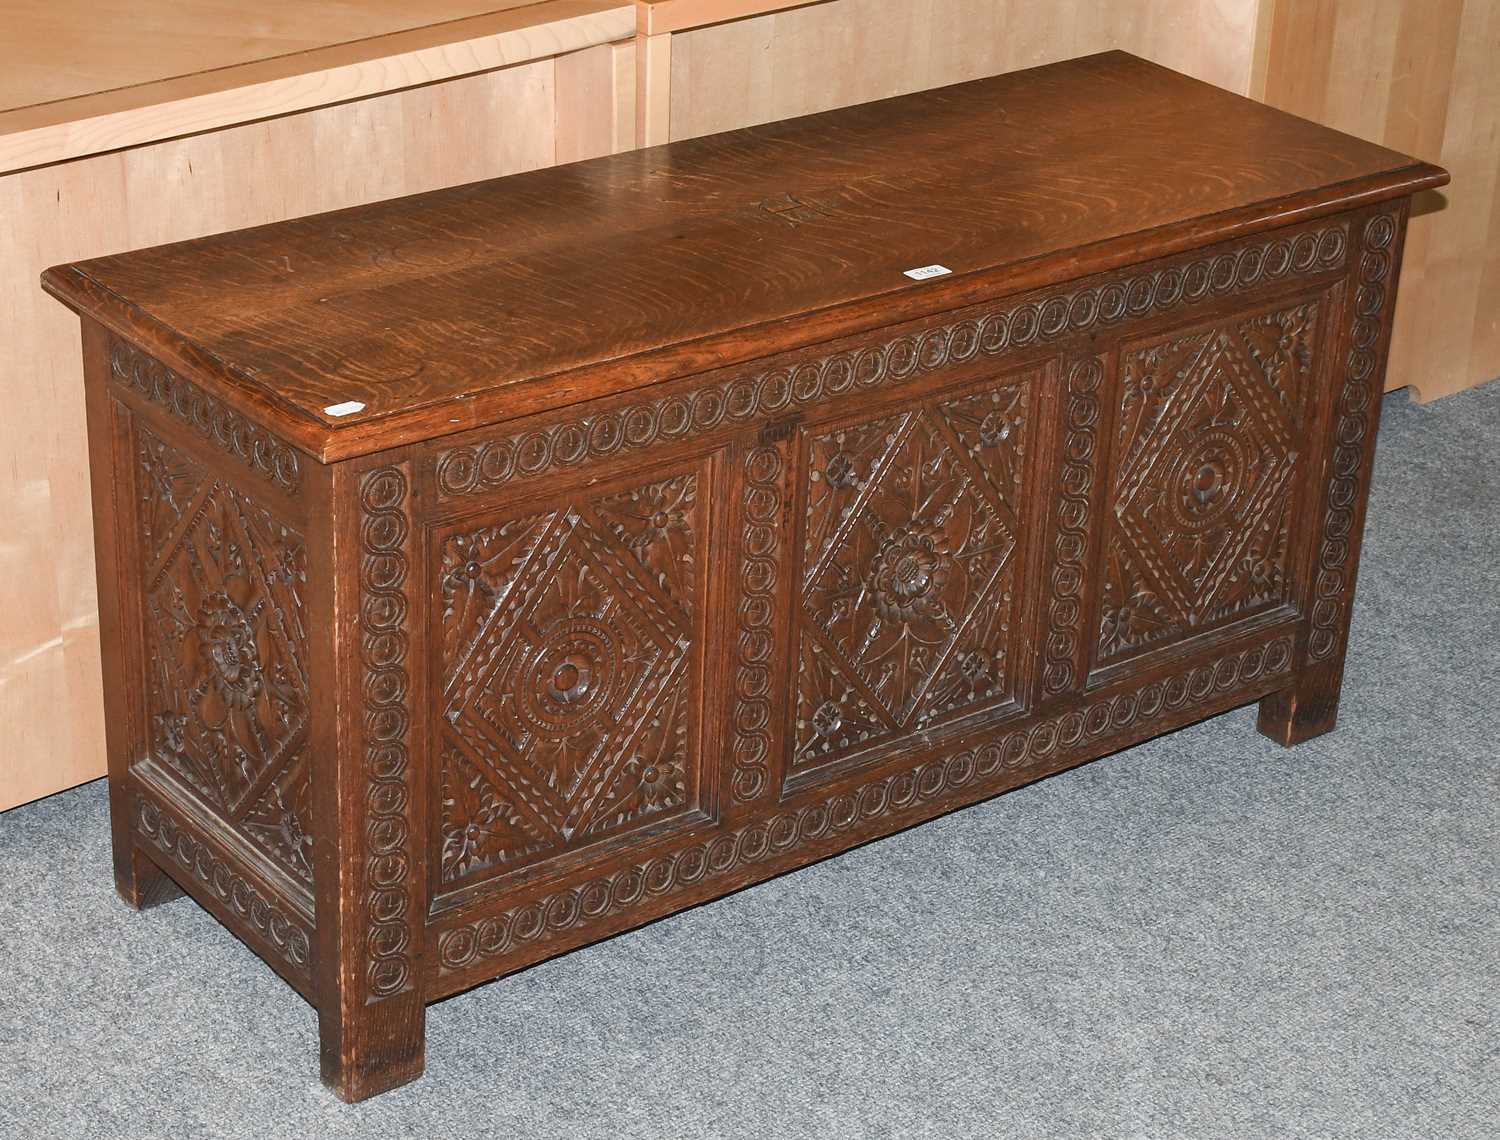 A Early 20th Century Carved Oak Coffer, the top dated 1914 and initialed IWH, 122cm by 45cm by 61cm